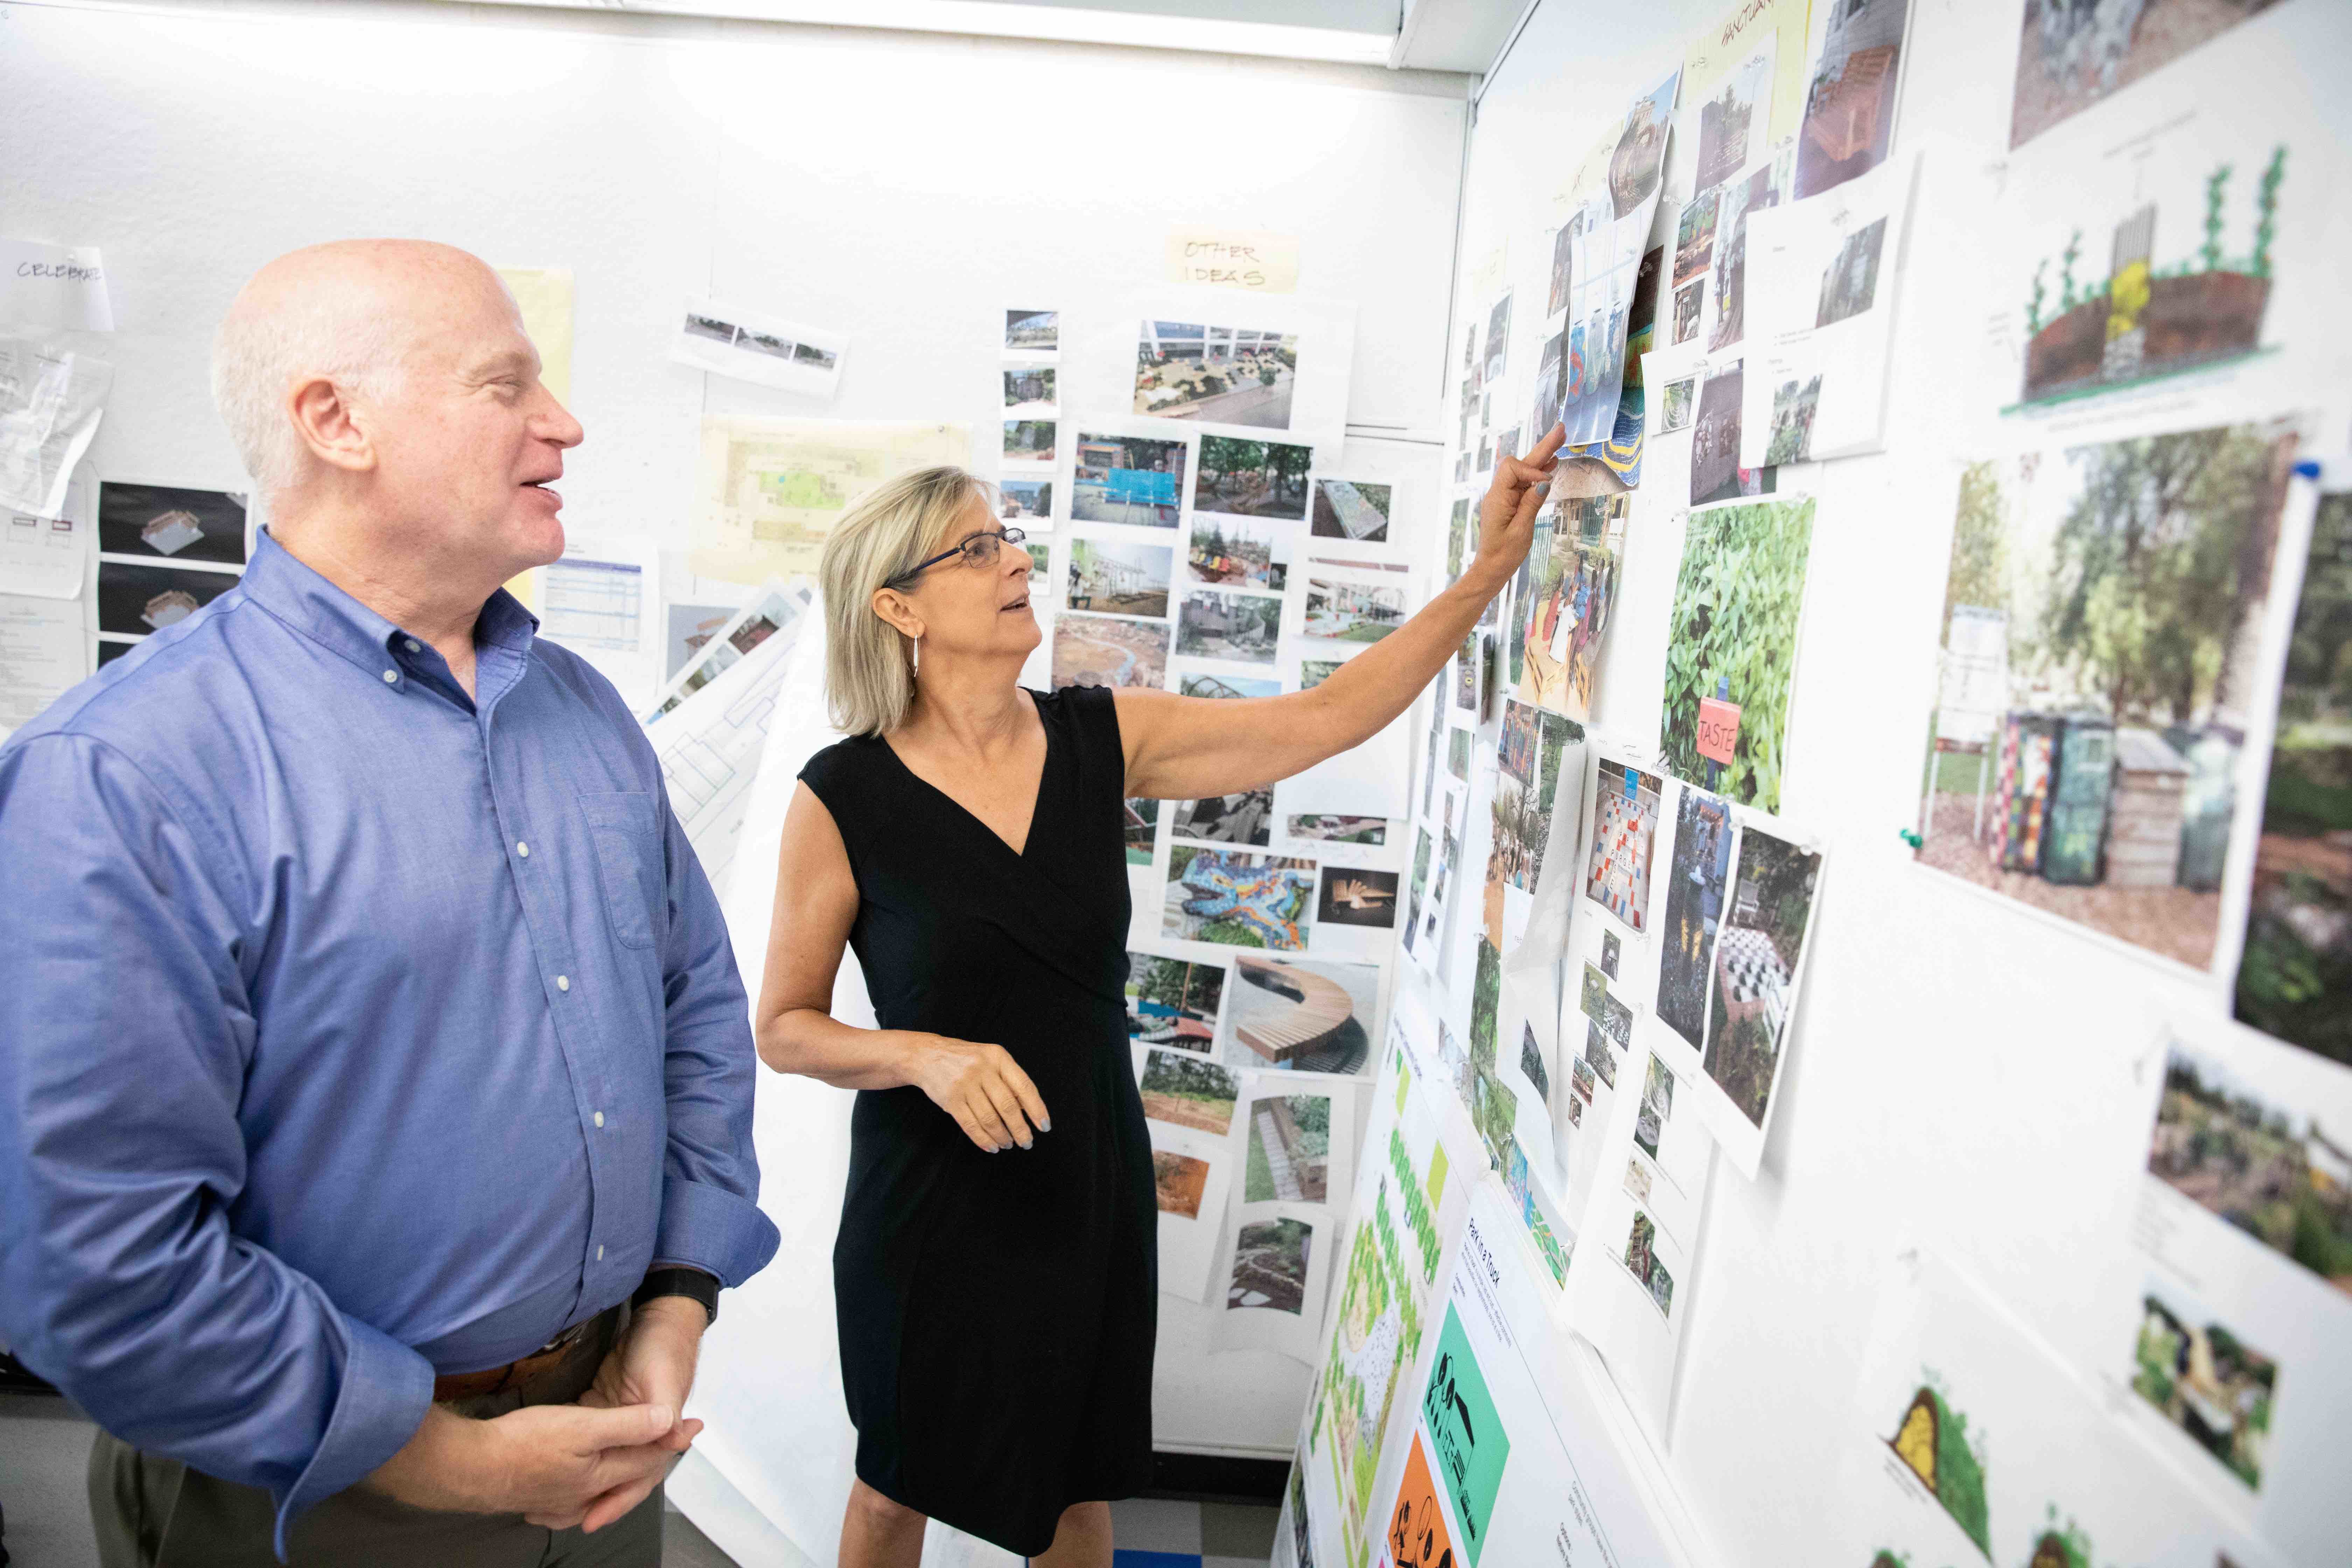 Jefferson faculty members Drew Harris and Kim Douglas examine mockups of Park in a Truck